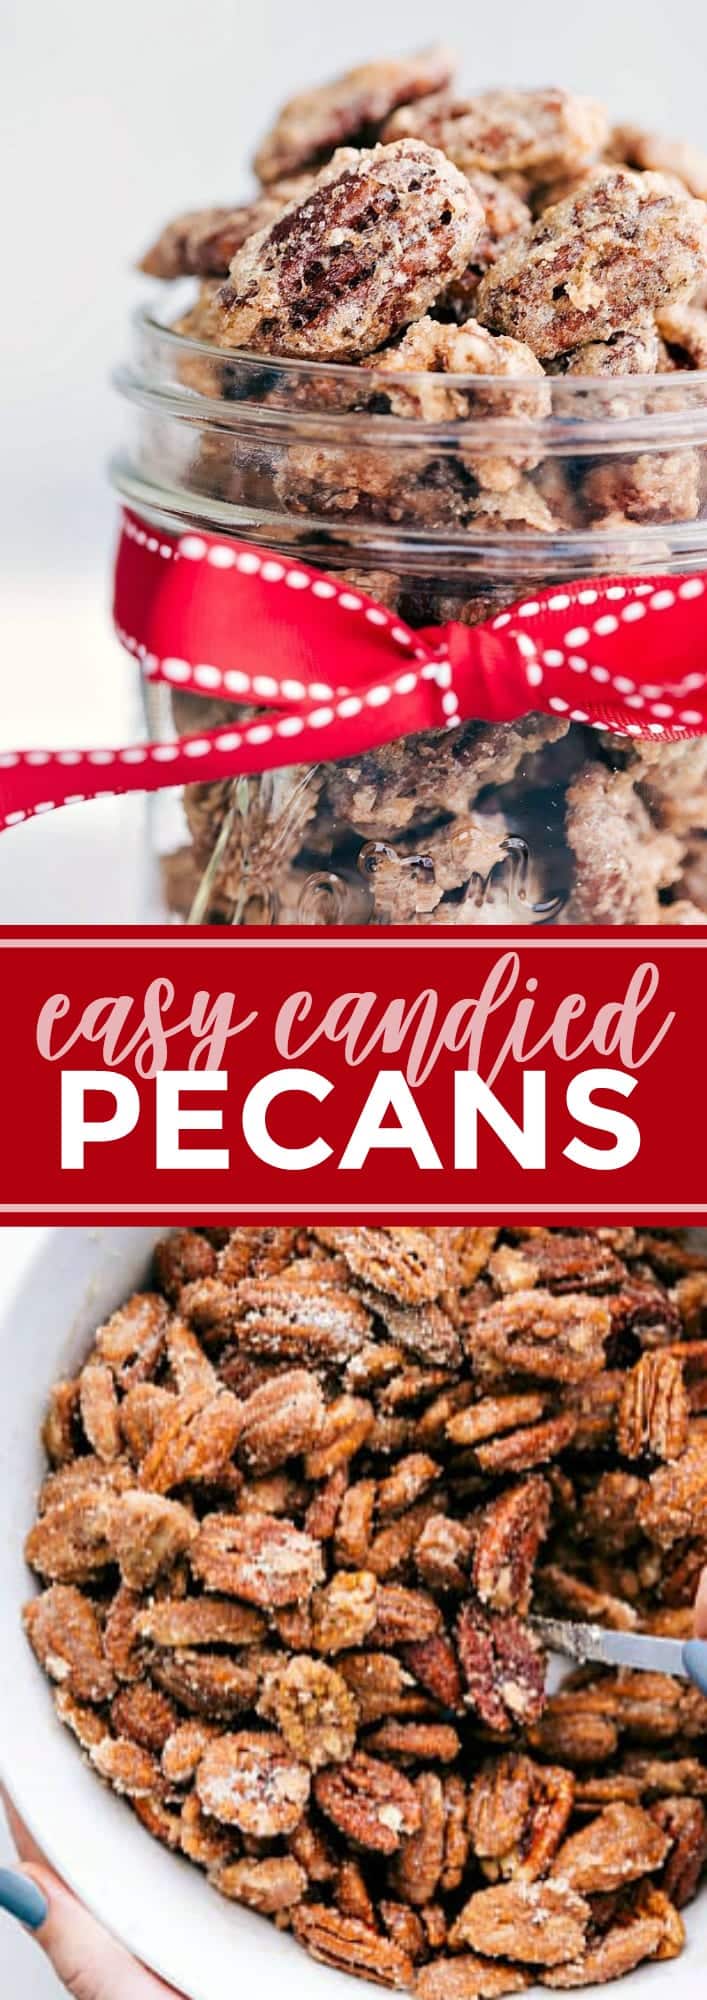 A foolproof and simple recipe to making delicious candied pecans! Package these pecans up for a festive gift, add them to an appetizer/cheese board, or top your favorite salads/desserts with them.  via chelseasmessyapron.com #candy #candied #pecan #pecans #recipe #christmas #holiday #holidays #treat #easy #quick